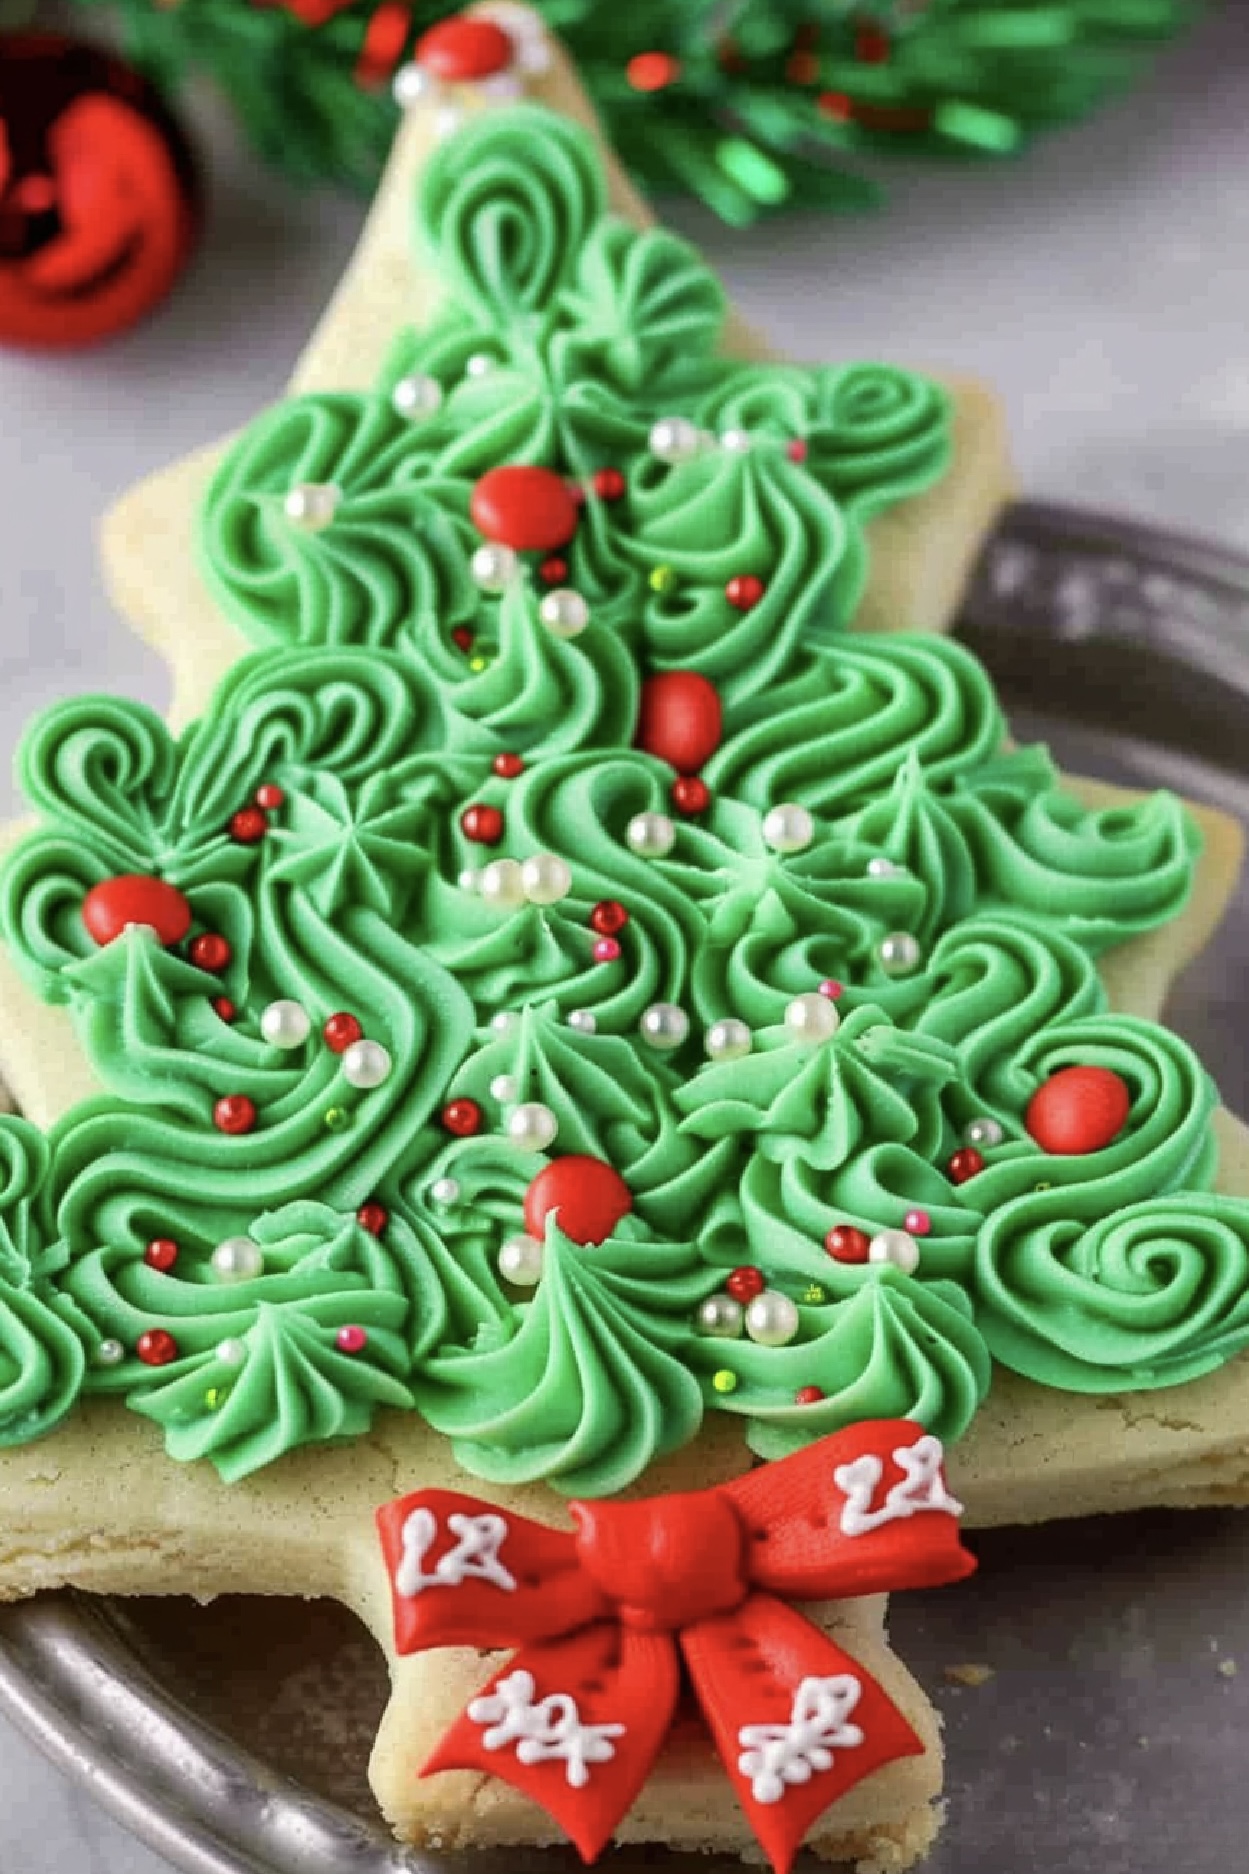 Hands down, the best cookie and frosting recipe ever for holidays! It doesn't get better than this!